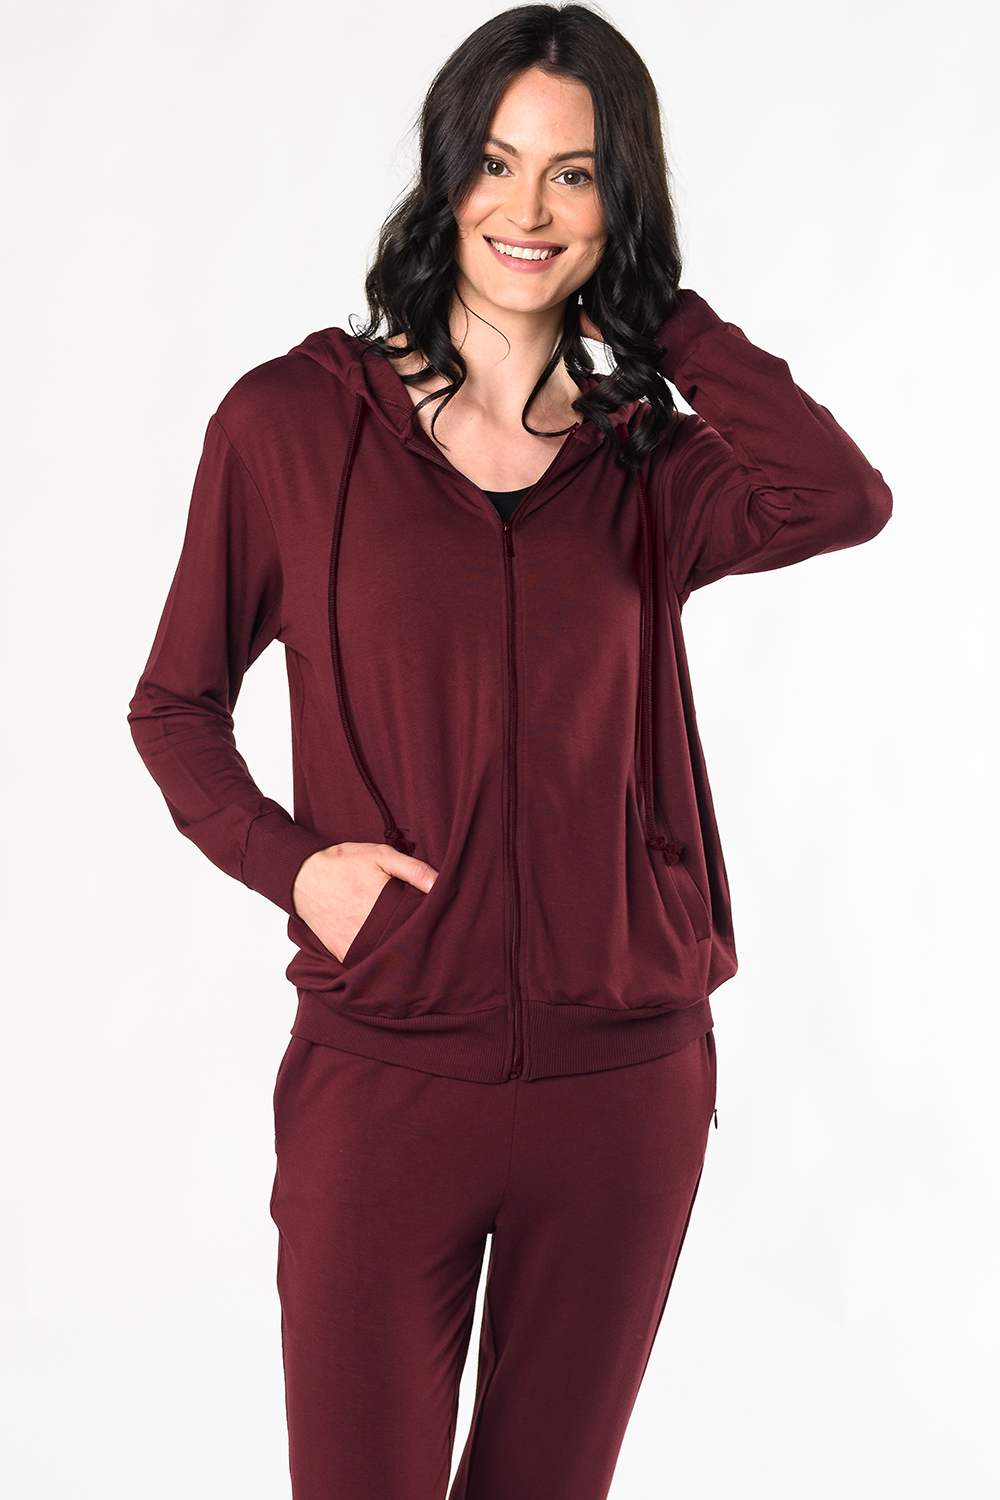 Bamboo track suits women –